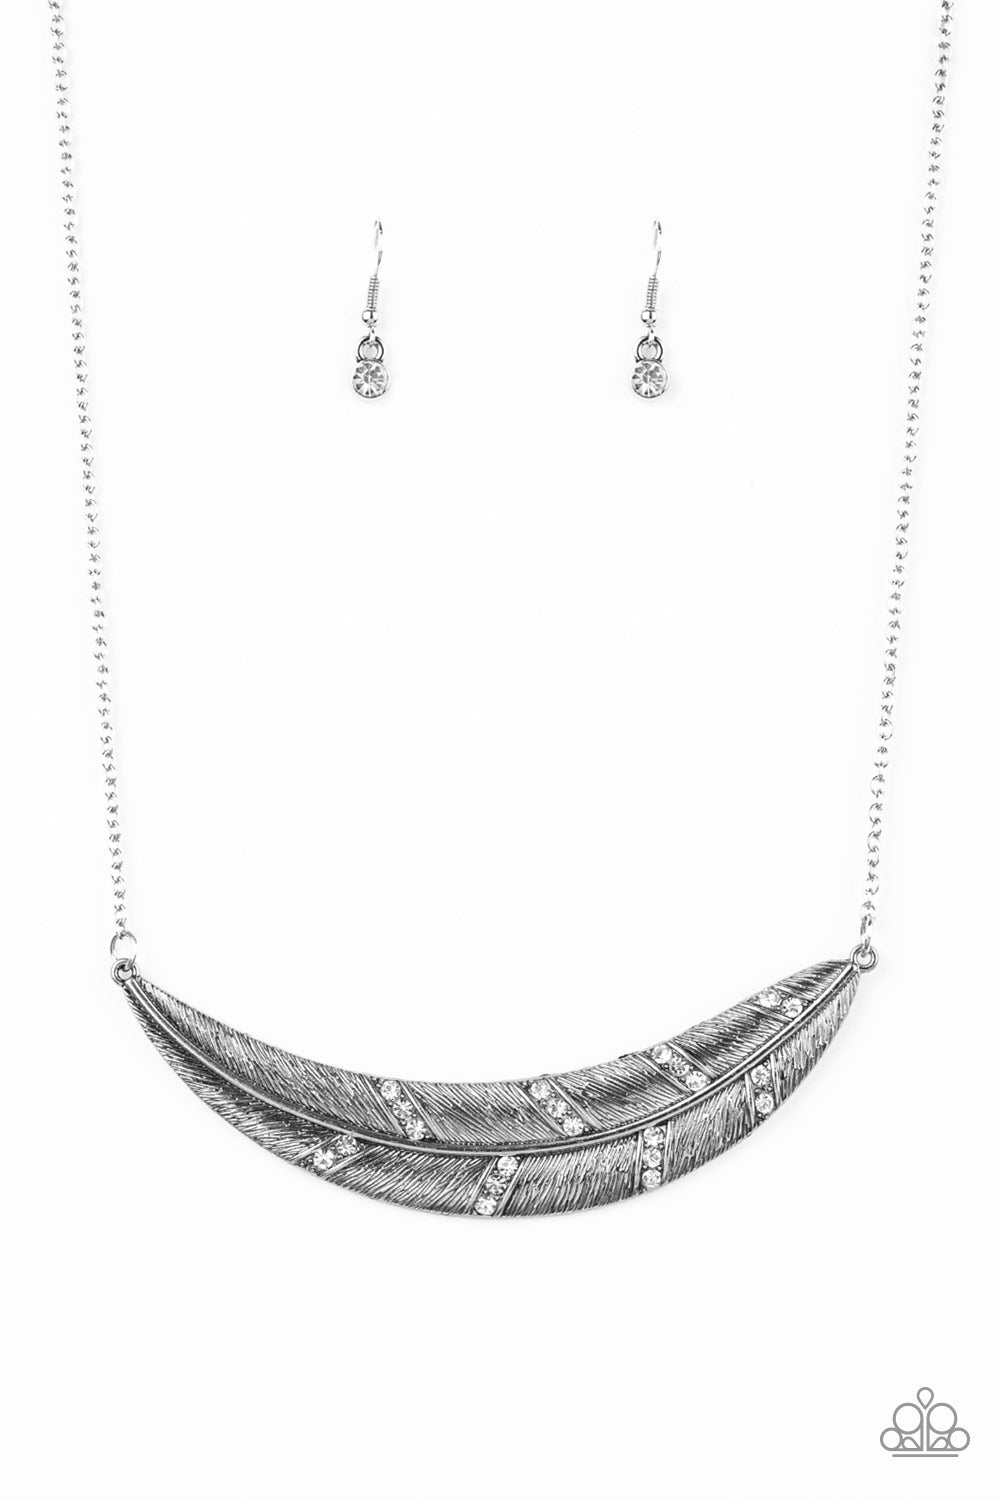 SAY YOU QUILL - SILVER NECKLACE